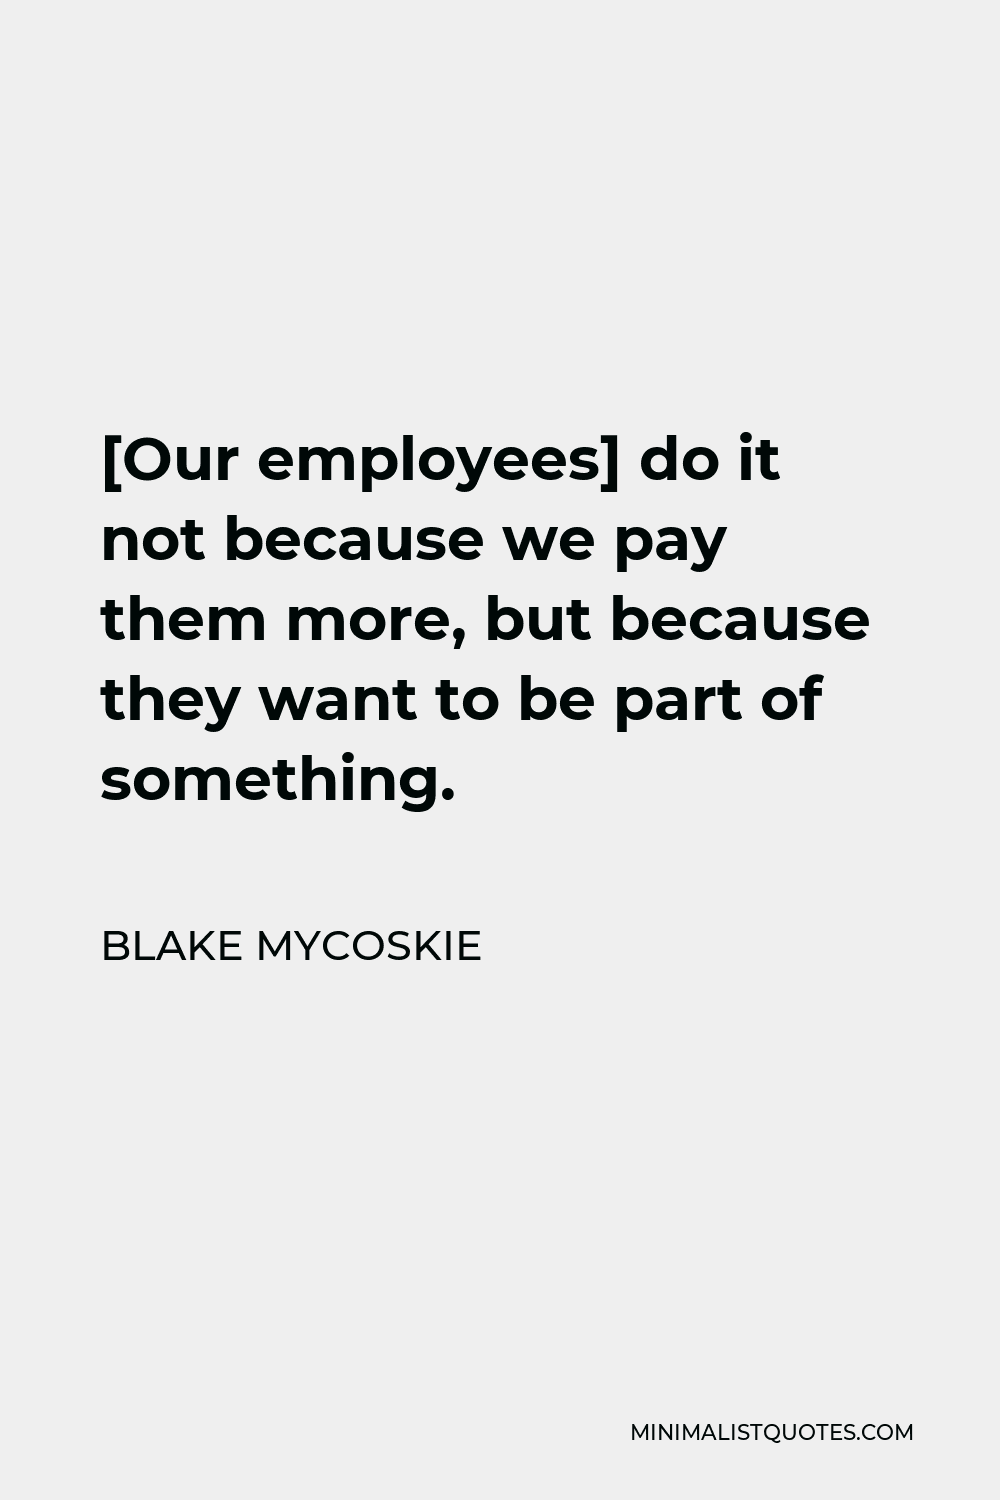 Blake Mycoskie Quote - [Our employees] do it not because we pay them more, but because they want to be part of something.